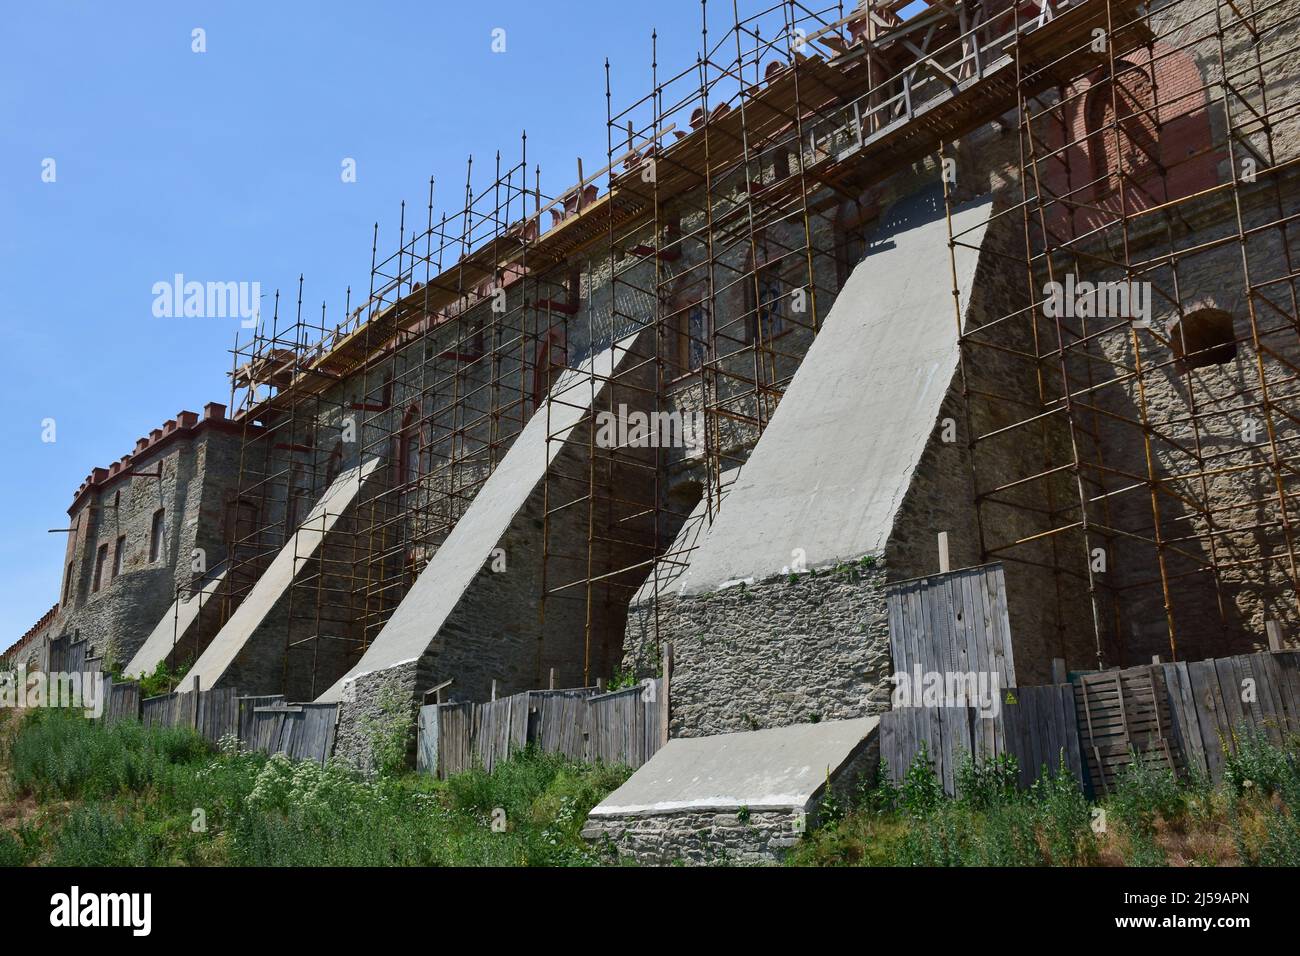 One of the walls of a medieval stone fortress in the construction repair scaffolding Stock Photo